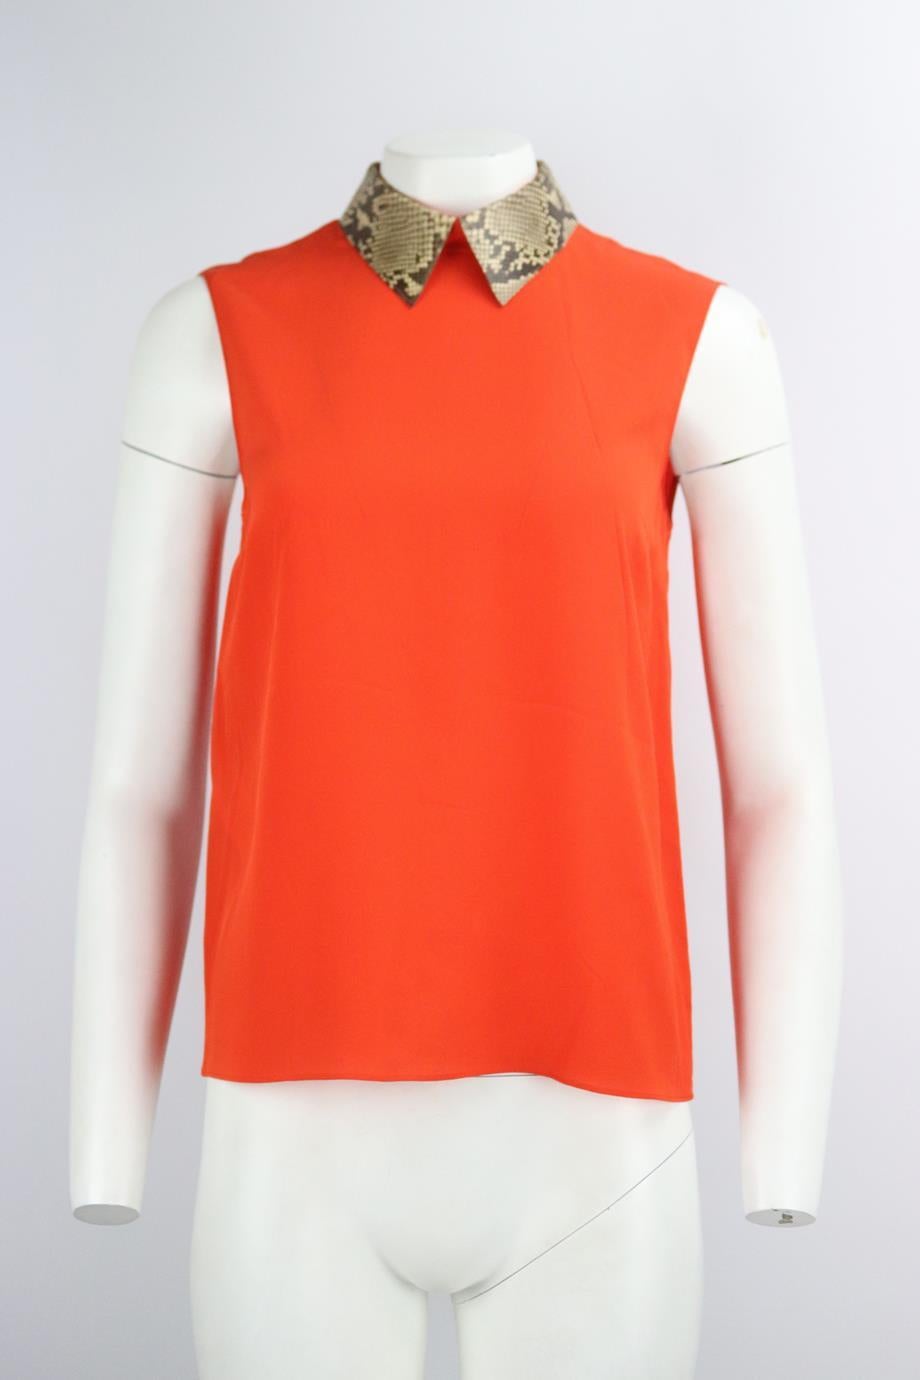 Gucci python trimmed silk top. Orange. Sleeveless, crewneck. Zip fastening at back. 100% Silk; fabric2: 100% python. Size: IT 42 (UK 10, US 6, FR 38). Bust: 37 in. Waist: 37 in. Hips: 38 in. Length: 24 in. Very good condition - No sign of wear; see